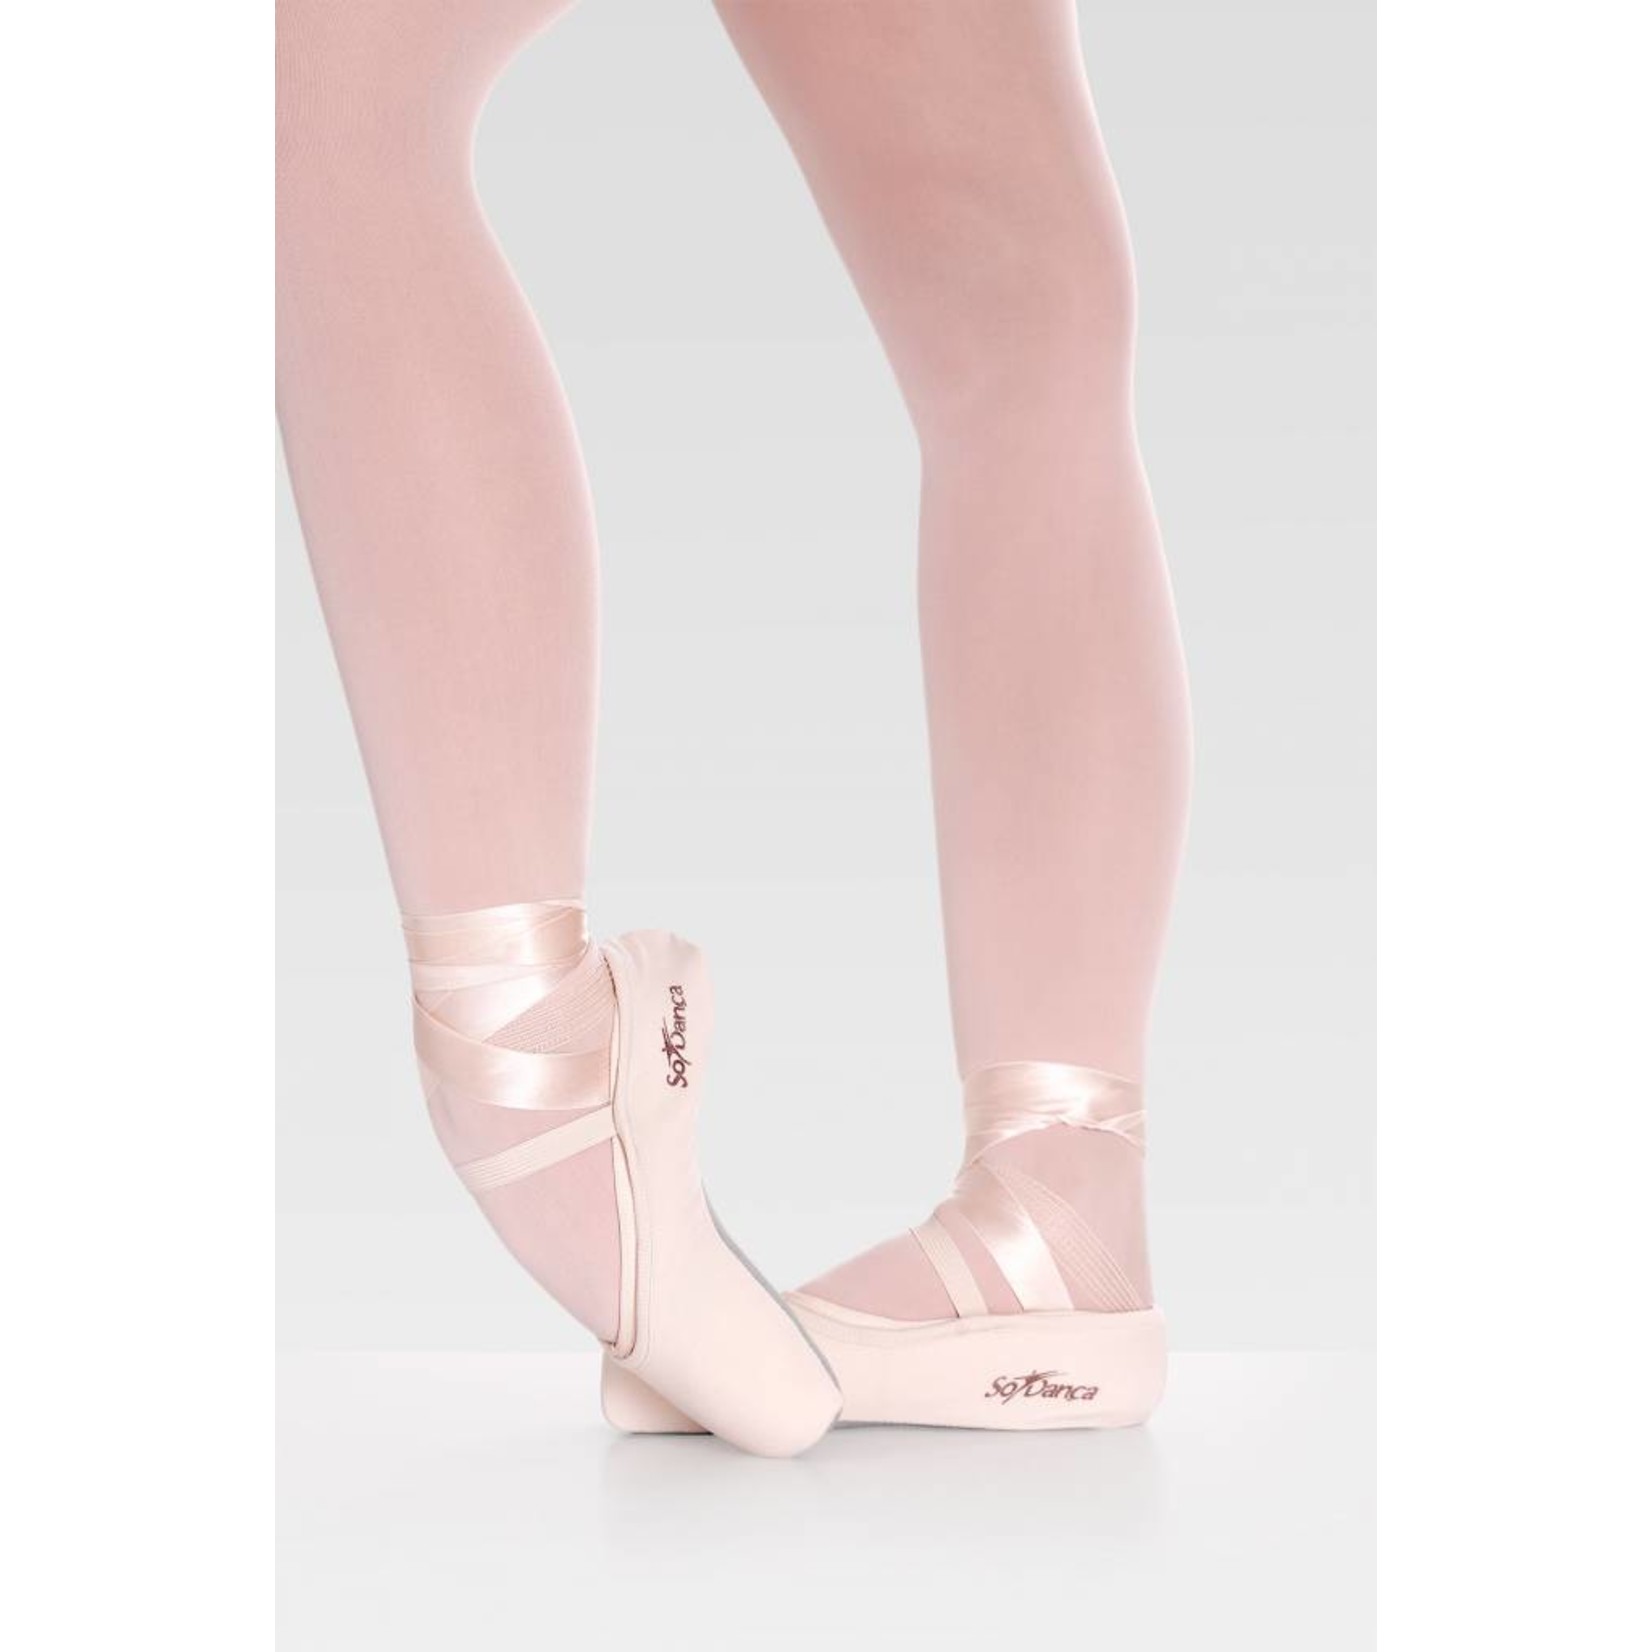 Ac 12 Pointe Shoes Cover Dancing Doll Dancewear 7676